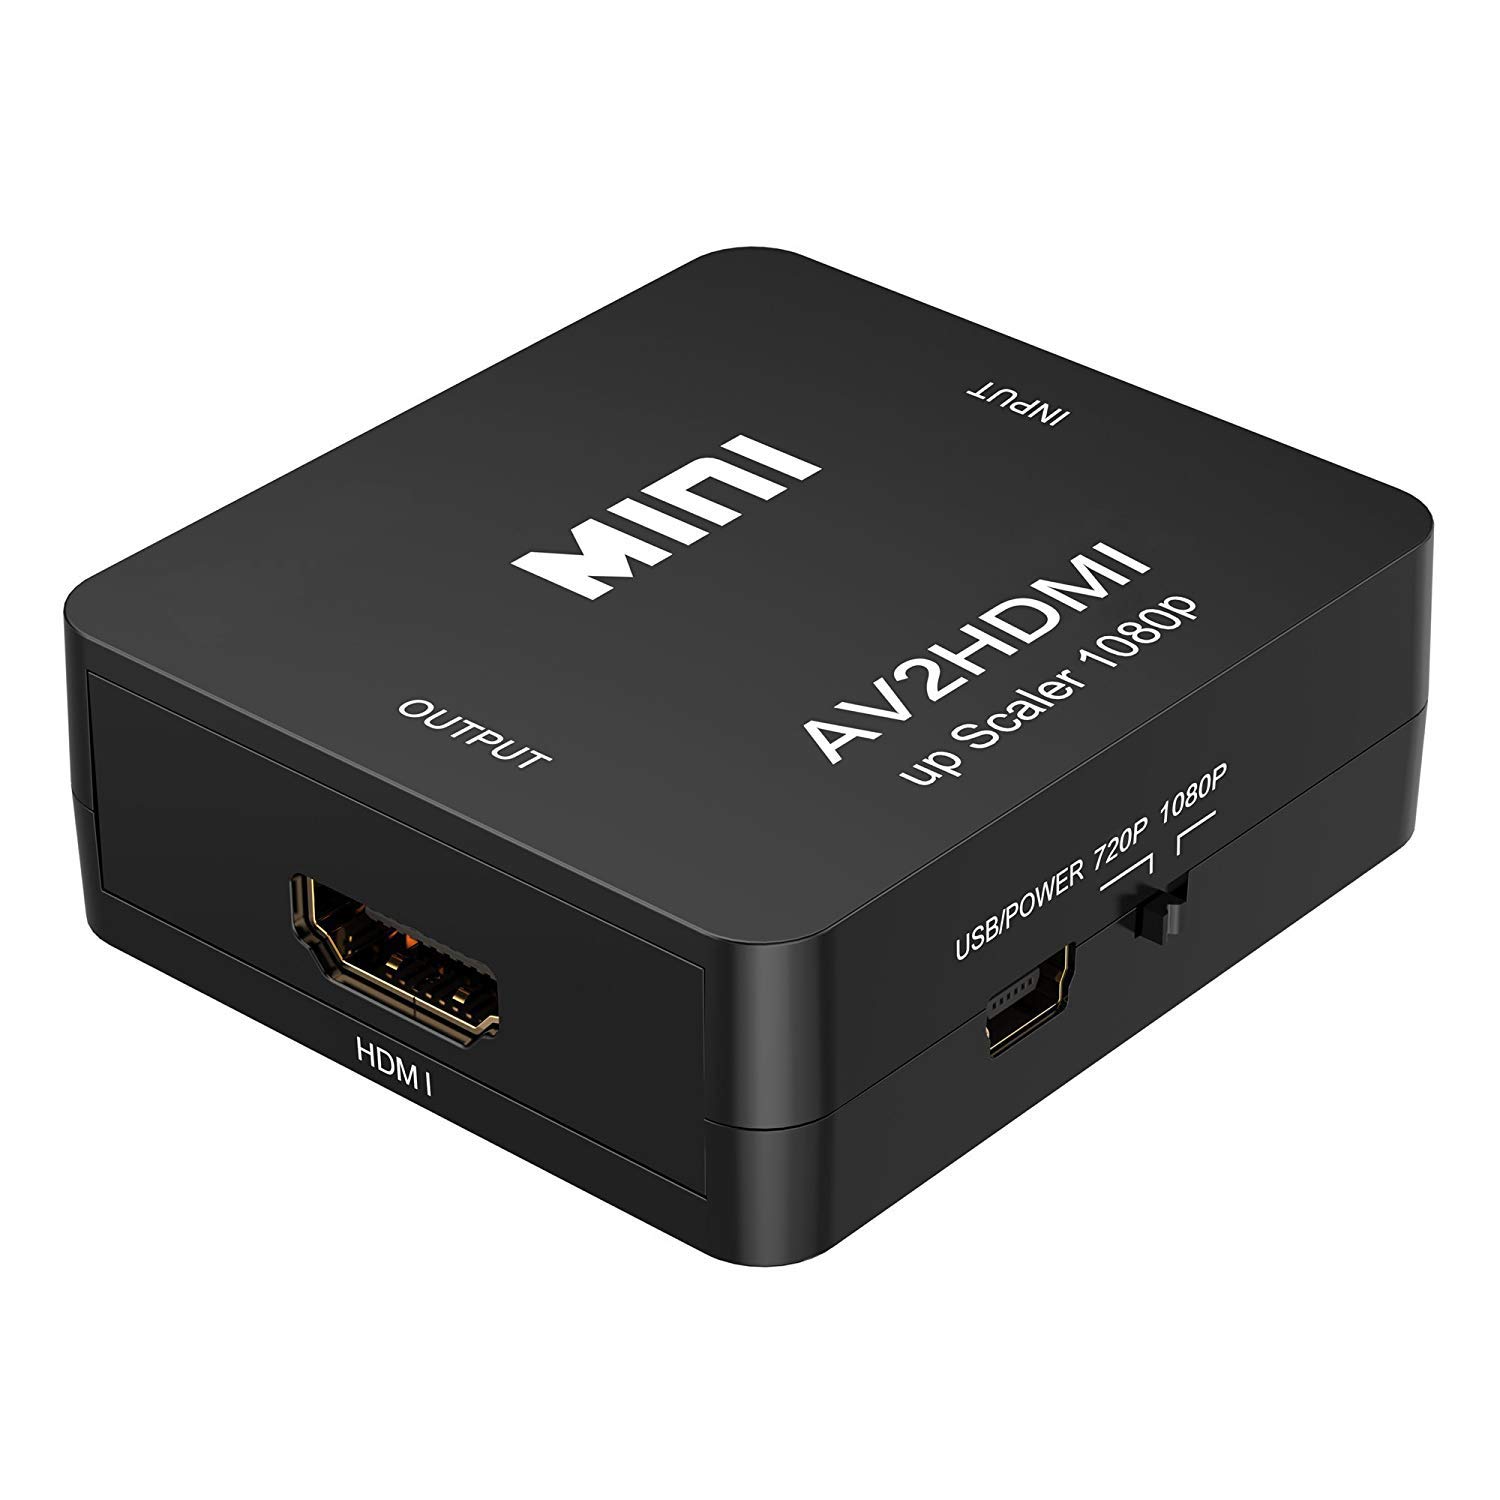 RCA to HDMI, Coolmade 1080P Mini RCA Composite CVBS AV to HDMI Video Audio Converter Adapter Supporting PAL/NTSC with USB Charge Cable for PC Laptop Xbox PS4 PS3 TV STB VHS VCR Camera DVD - image 3 of 8